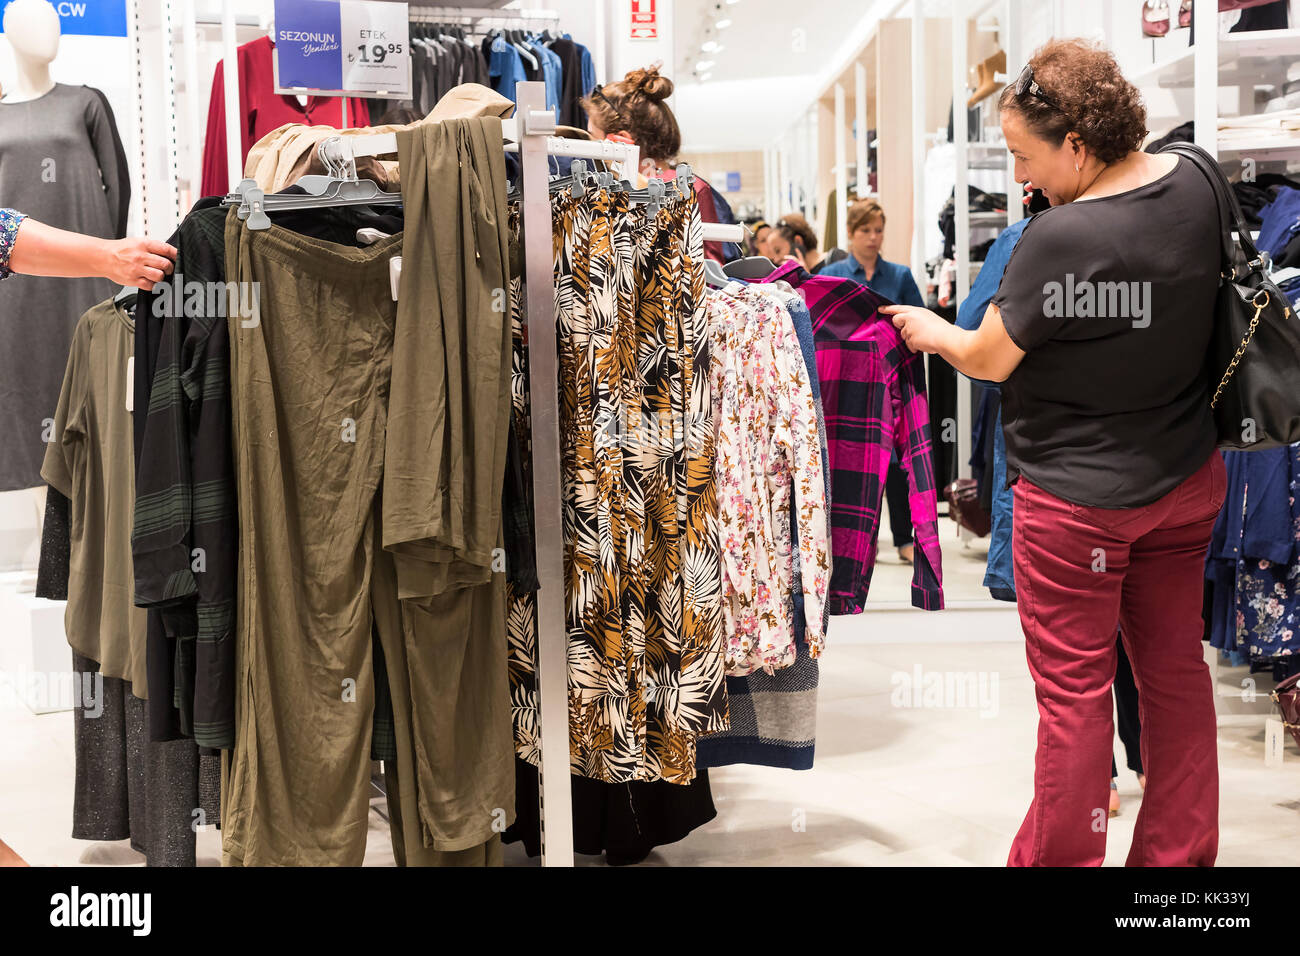 MANAVGAT, TURKEY - 1 OCTOBER , 2017: Shopping center in the city, clothing store for and adults LC Waikiki Stock - Alamy